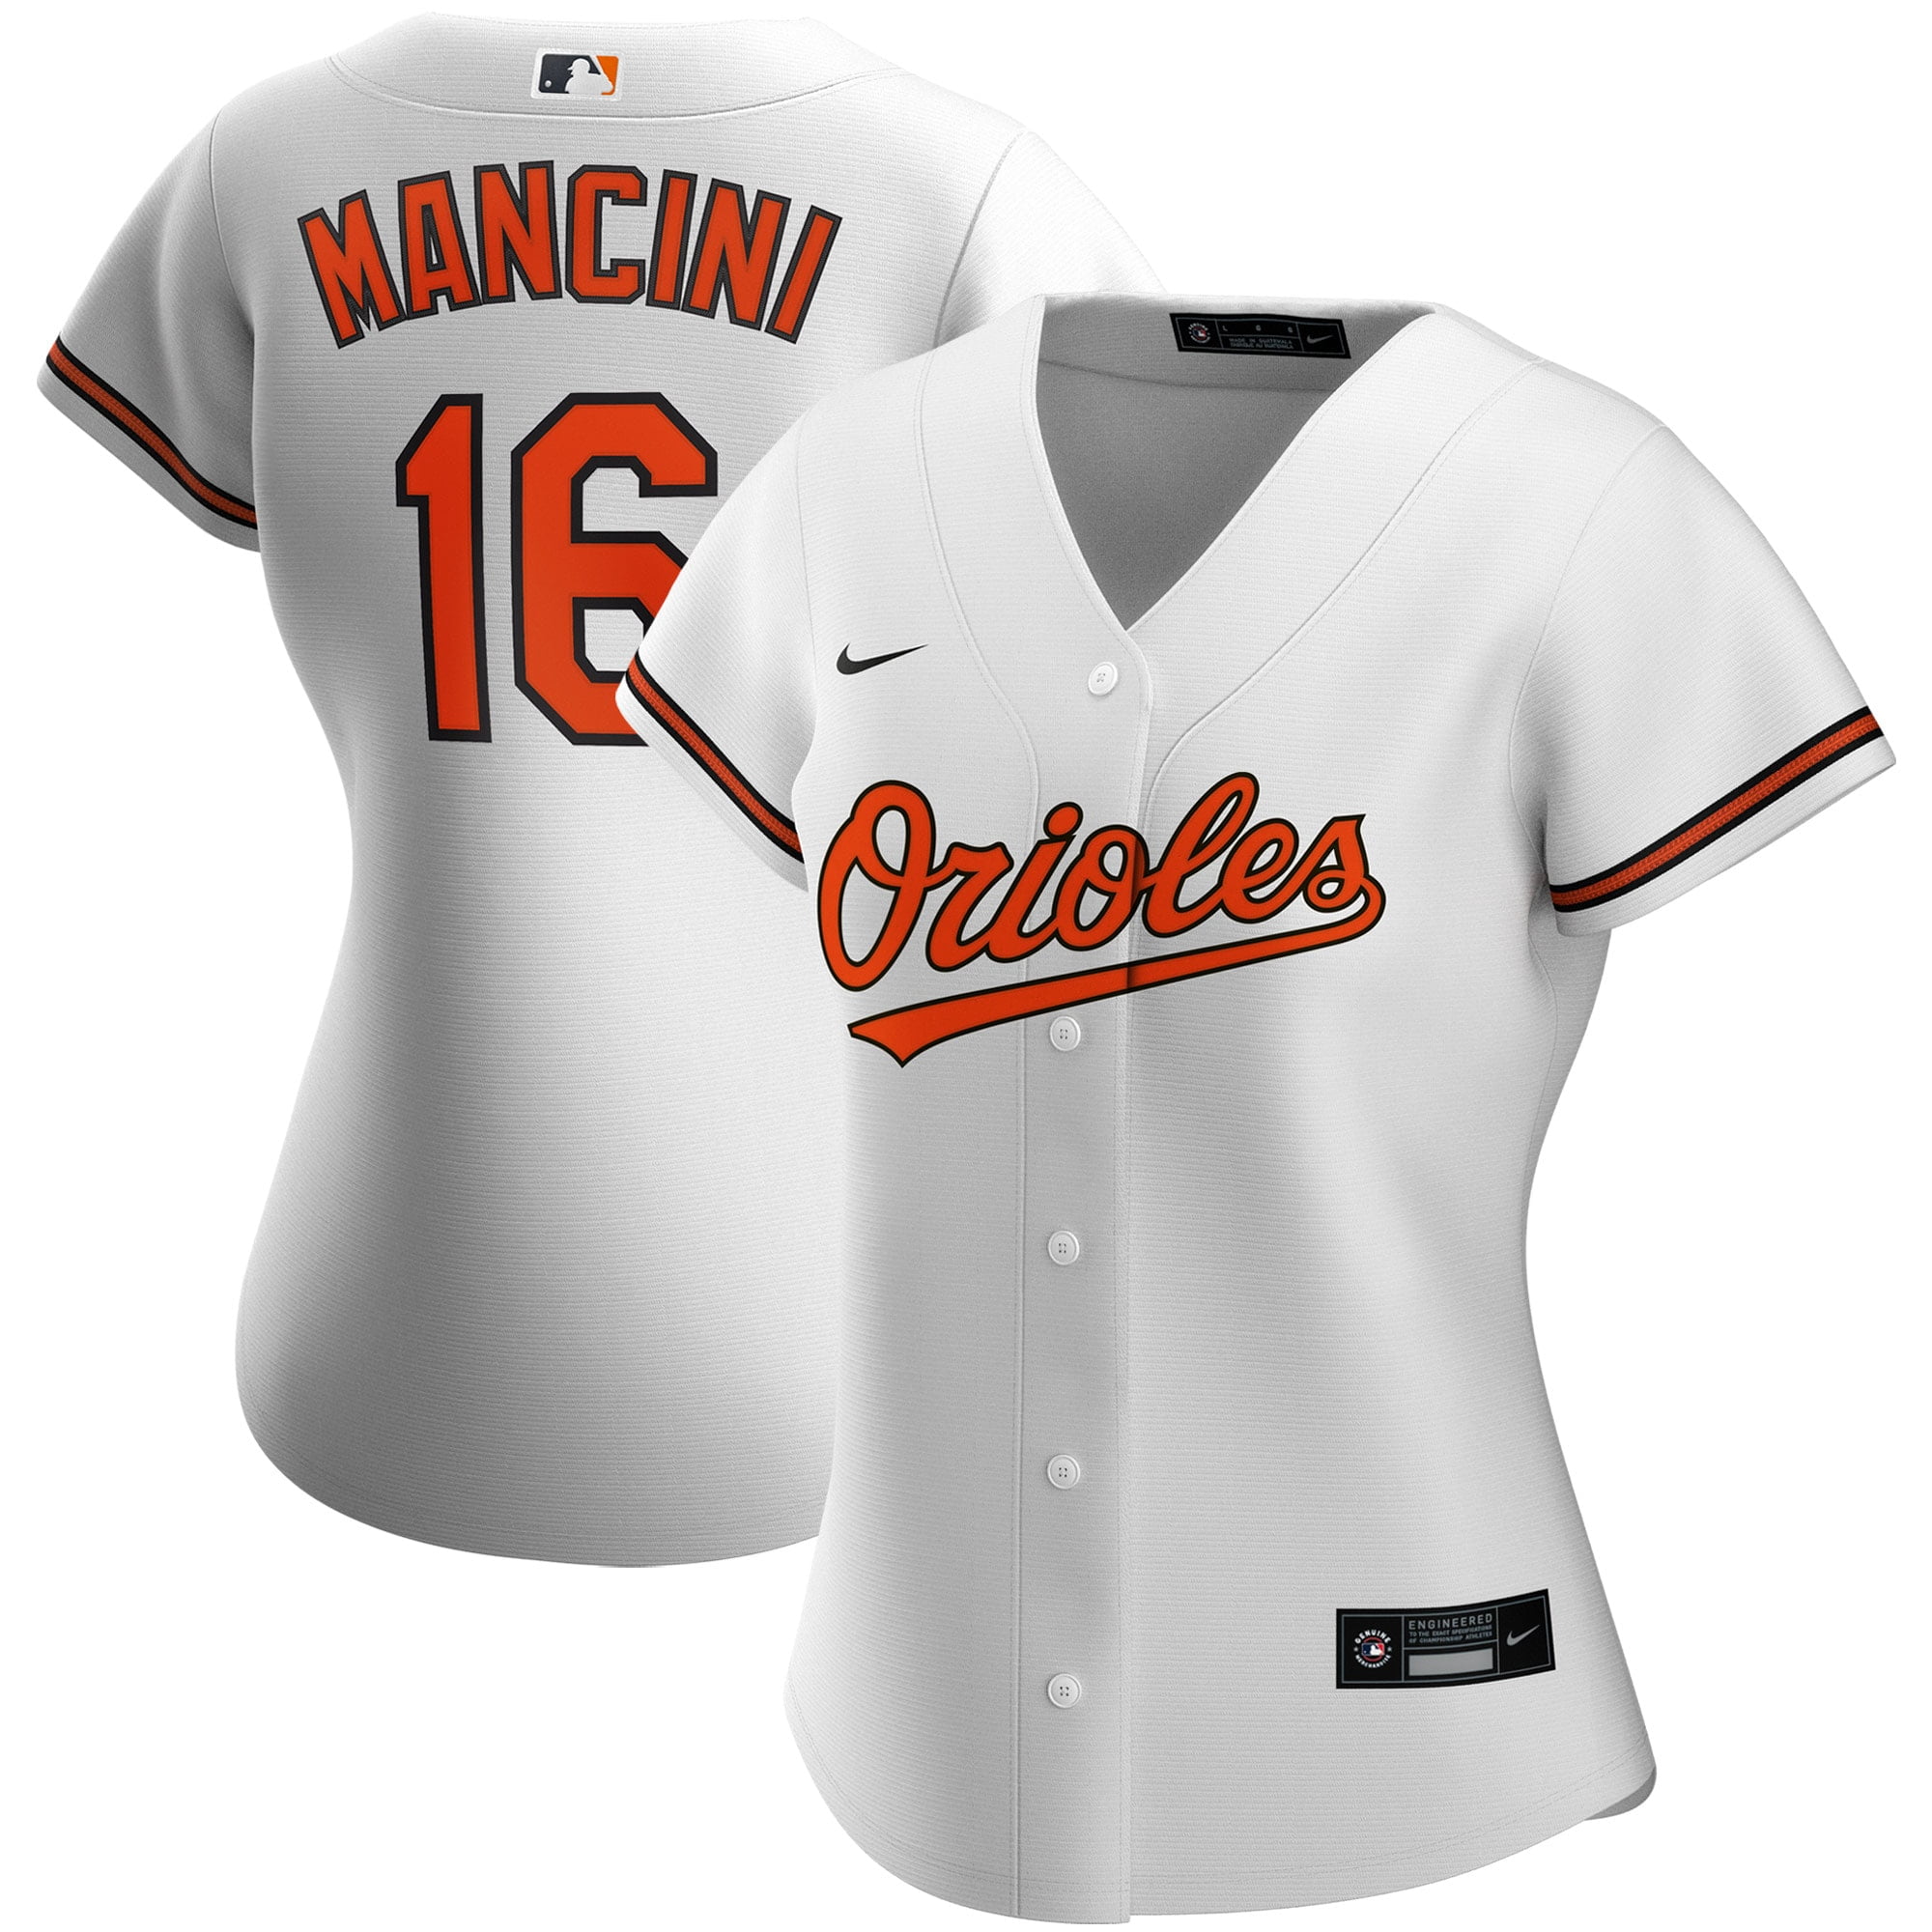 white orioles jersey